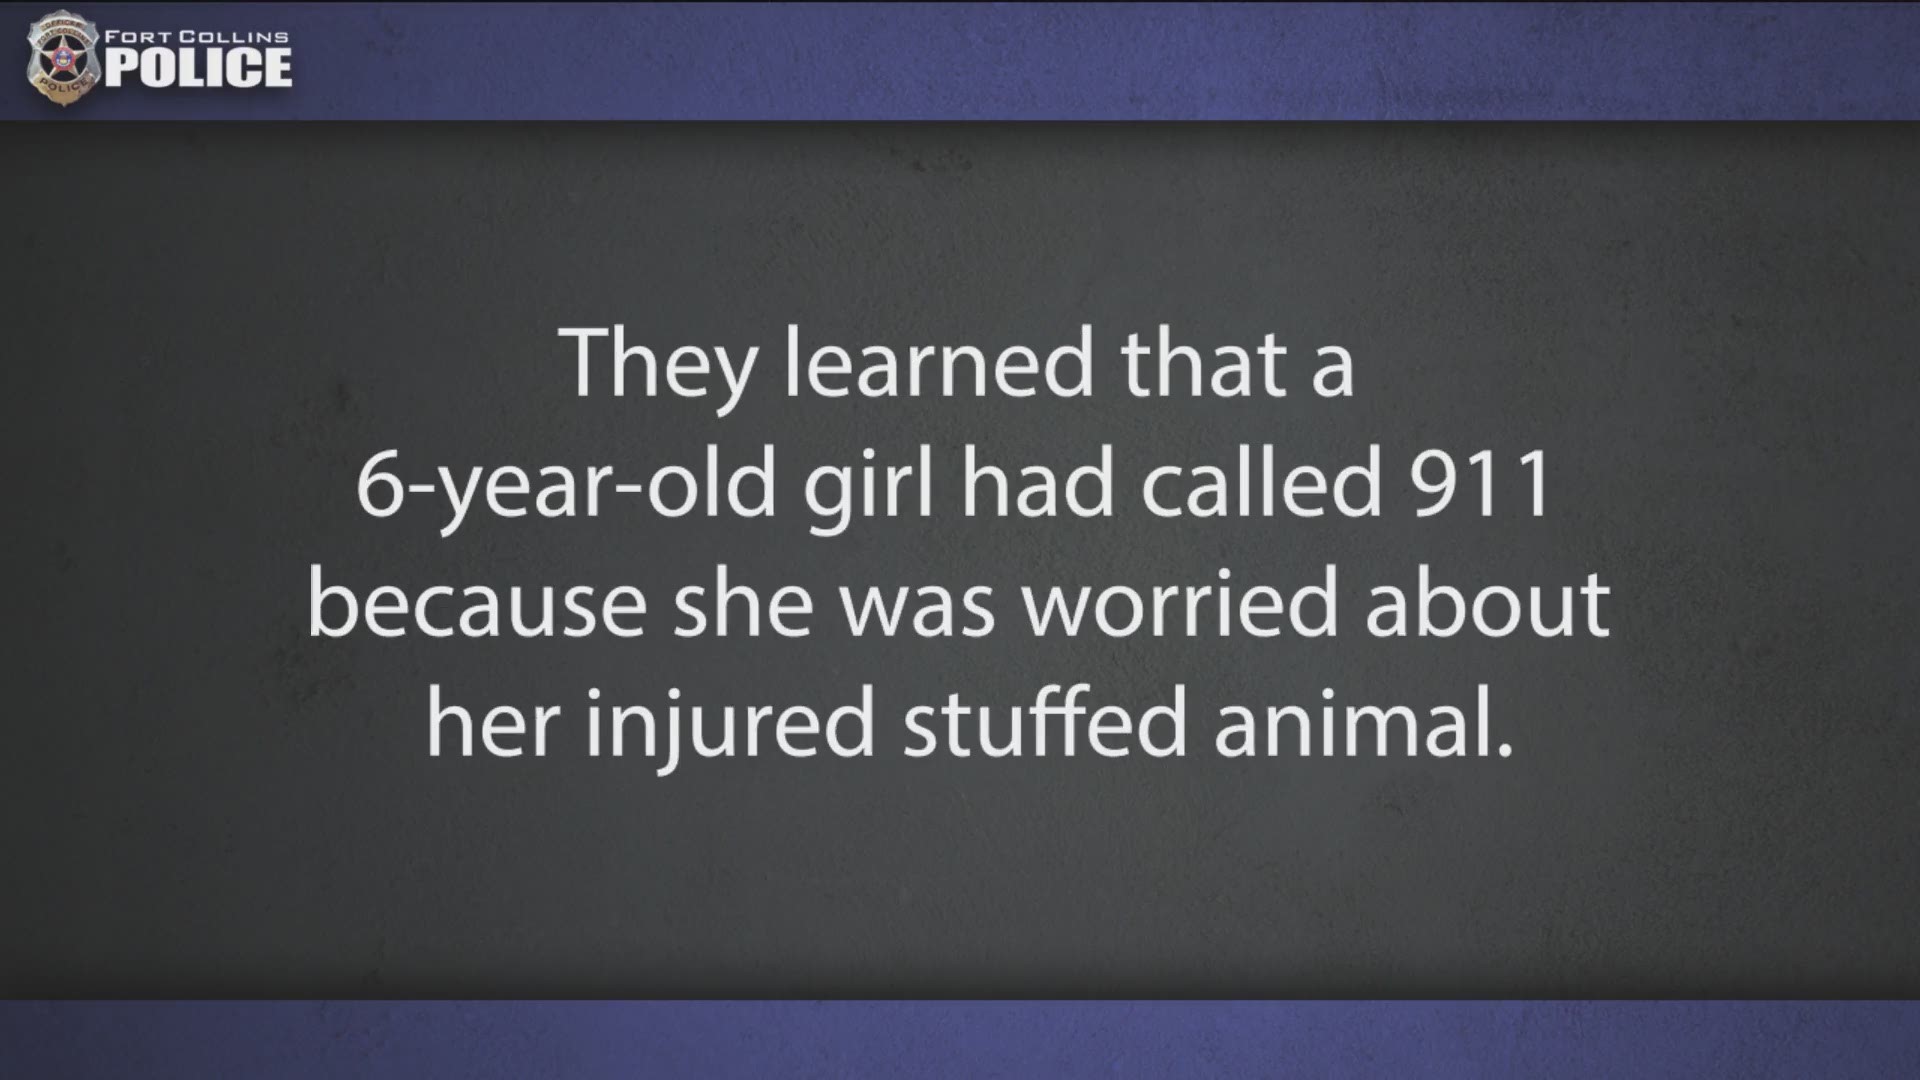 A 6-year-old girl called 911 when her stuffed bunny got hurt, and hung up without speaking to dispatchers.